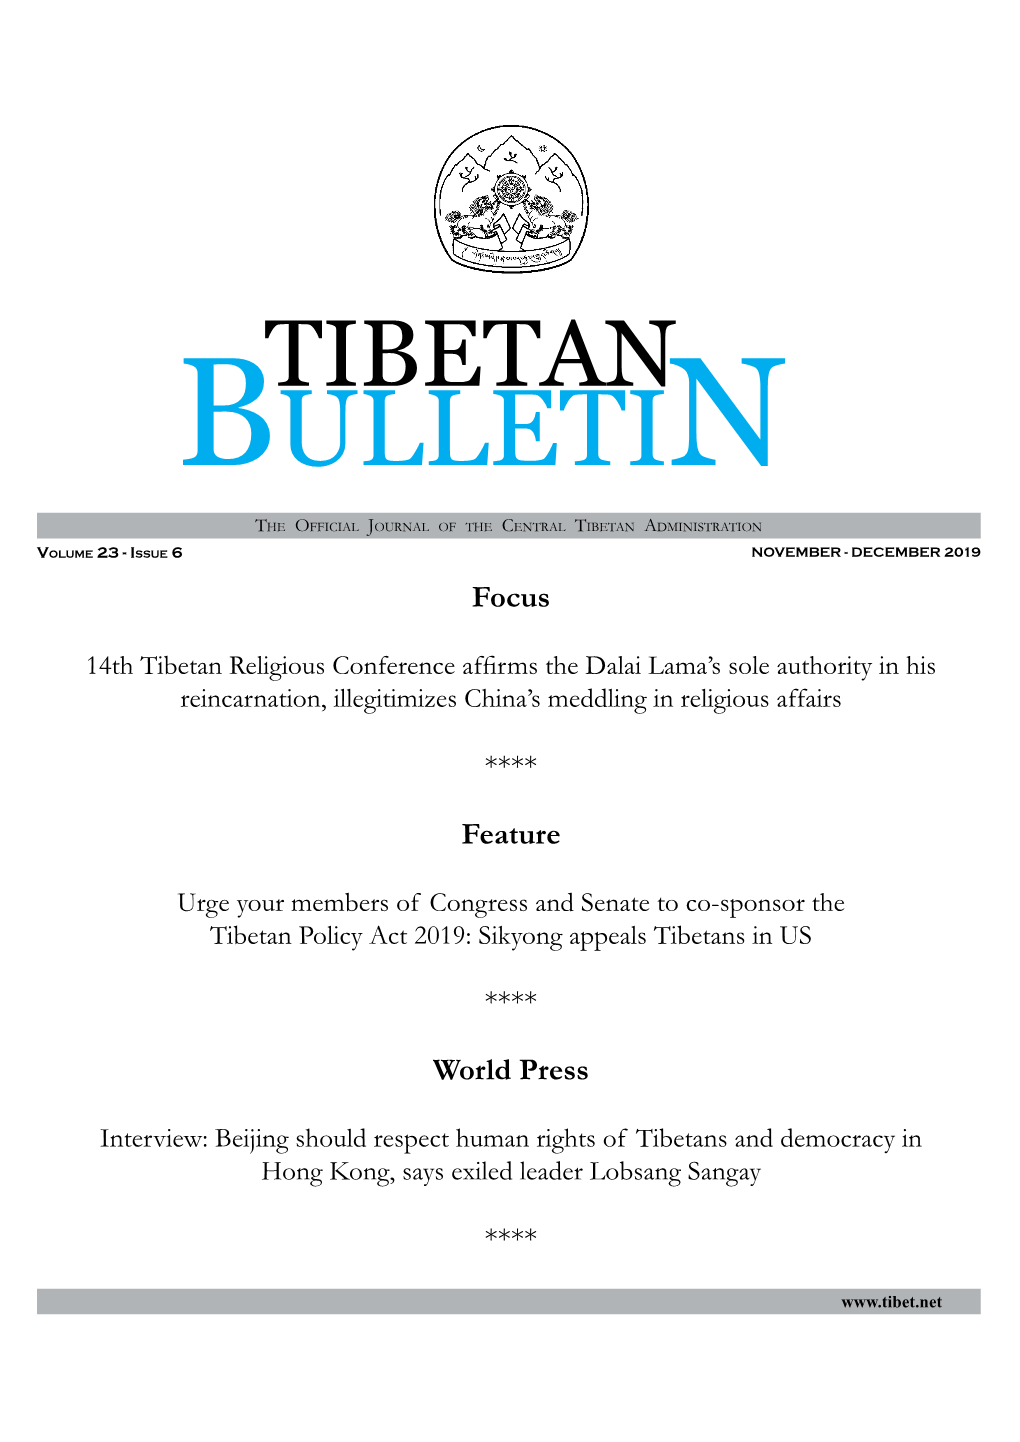 Bulletin the Official Journal of the Central Tibetan Administration